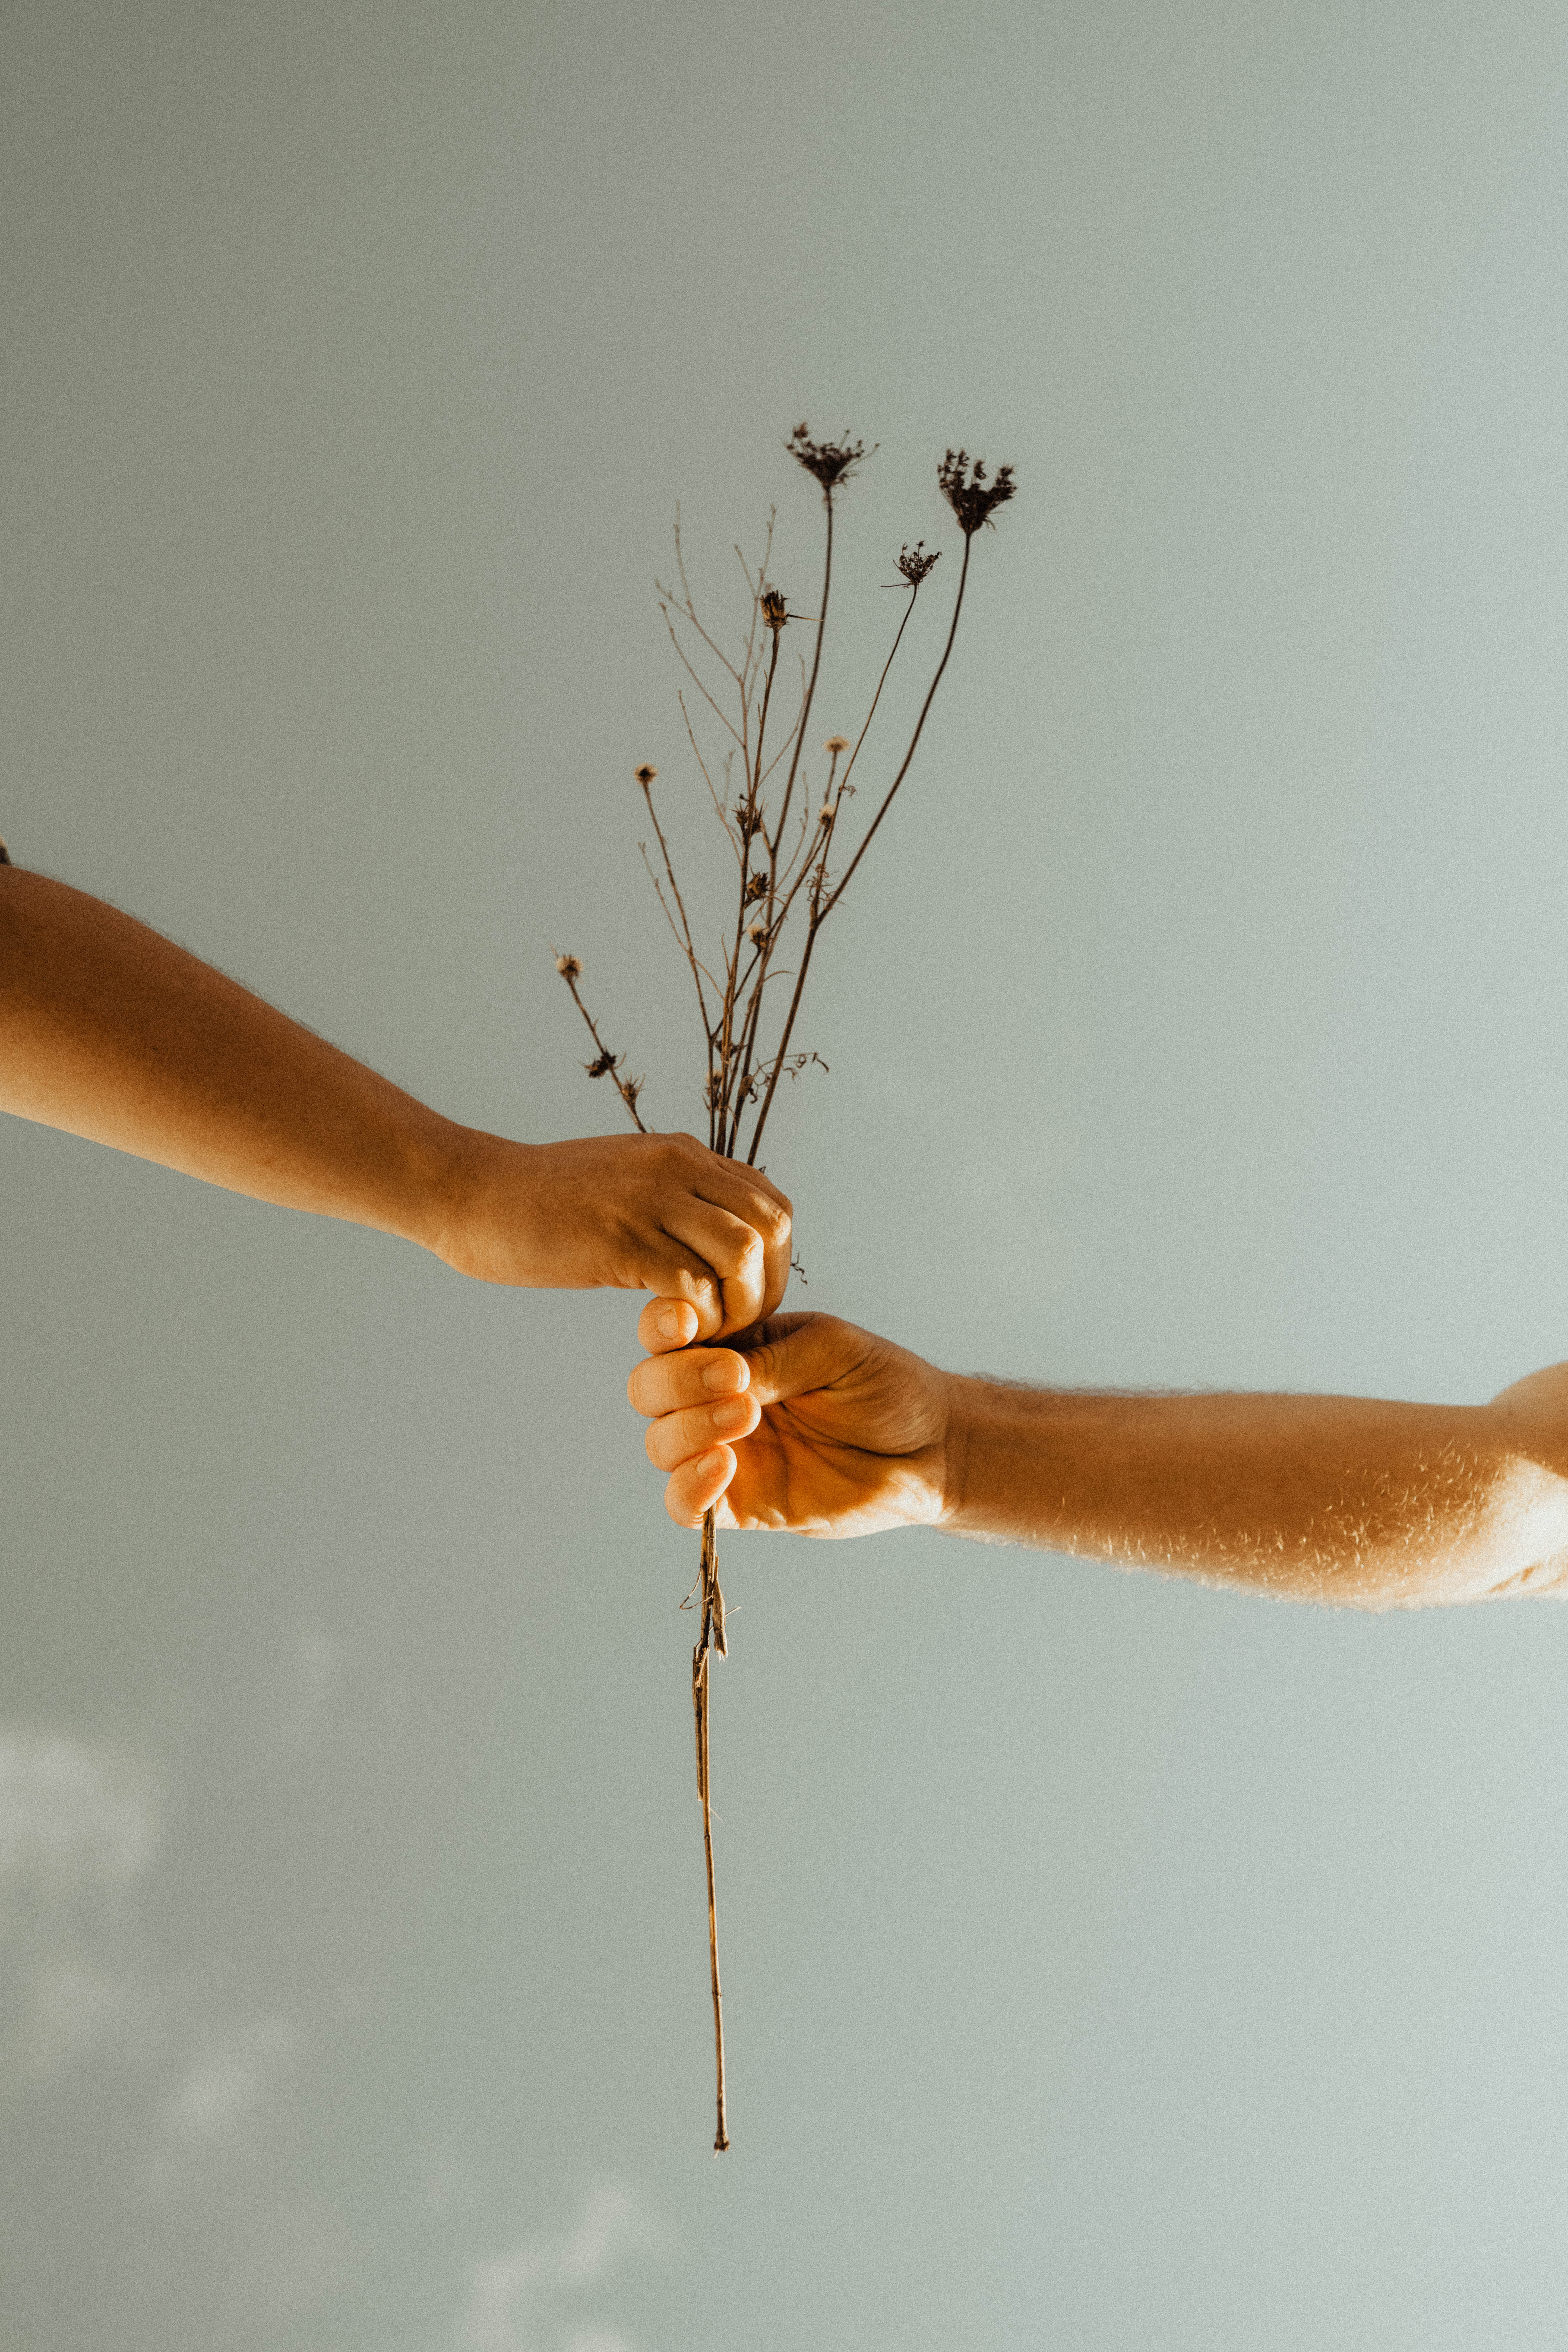 Two people holding dried flowers